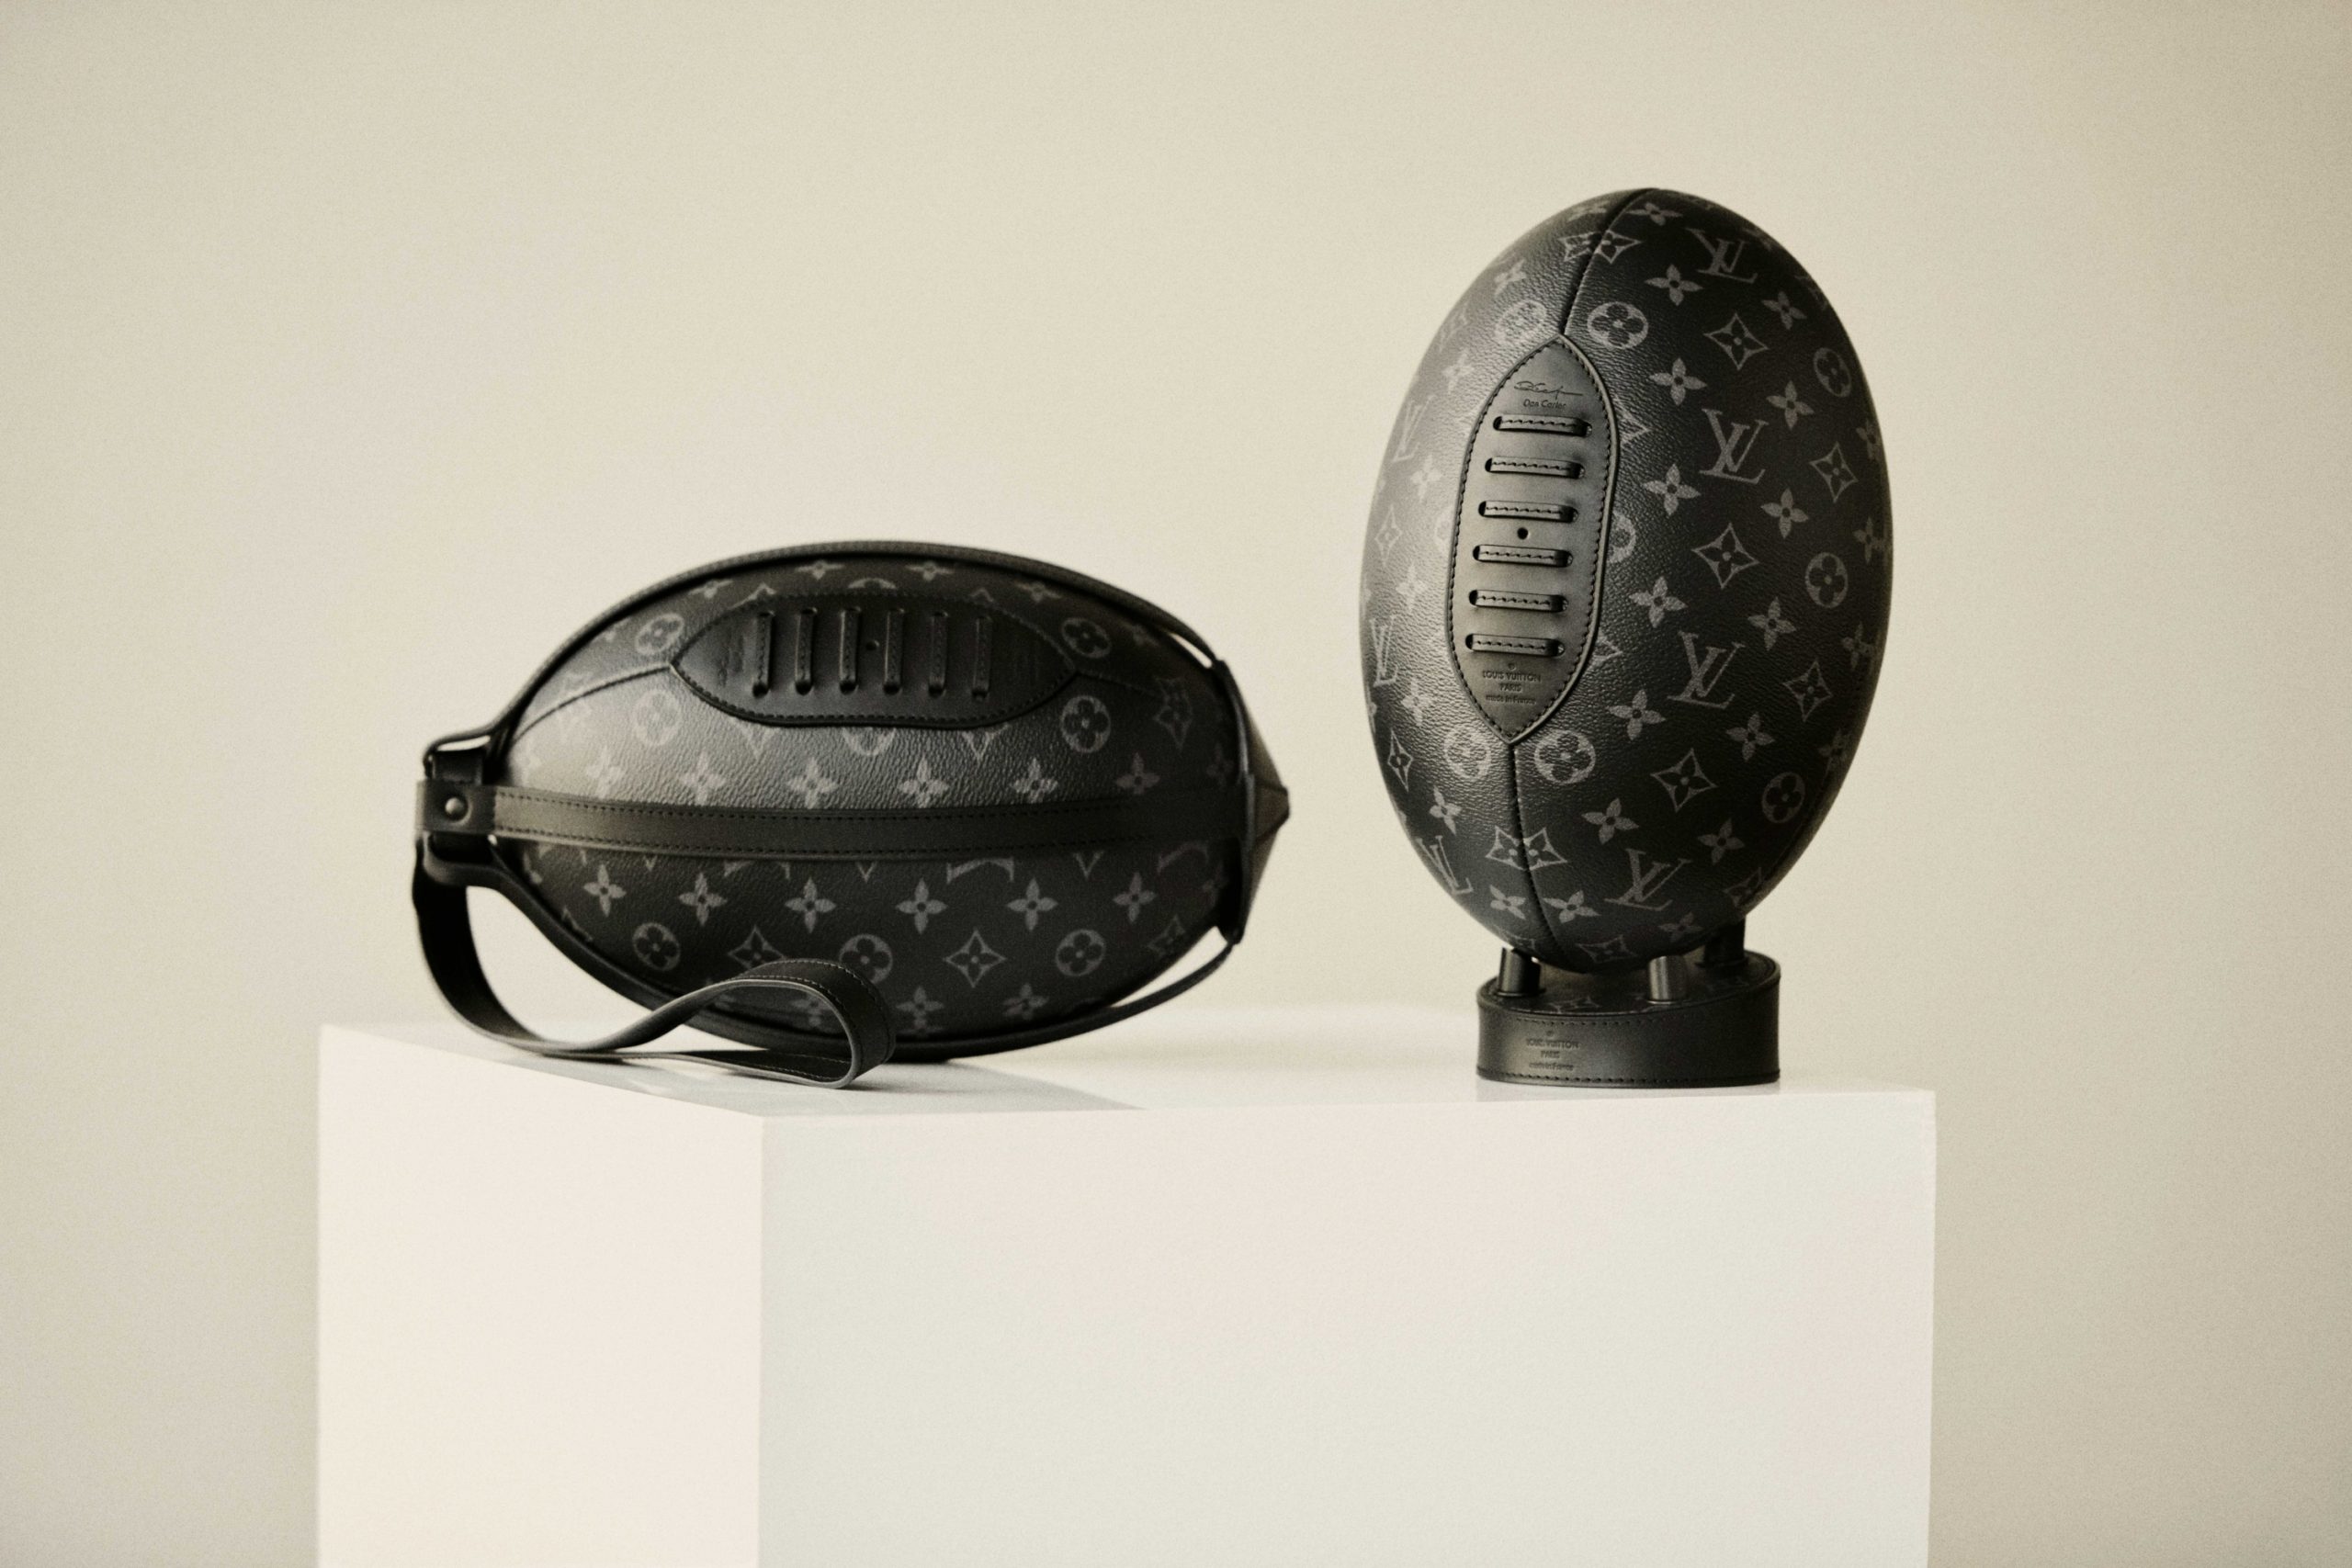 Louis Vuitton unveils an exciting new collaboration with Dan Carter